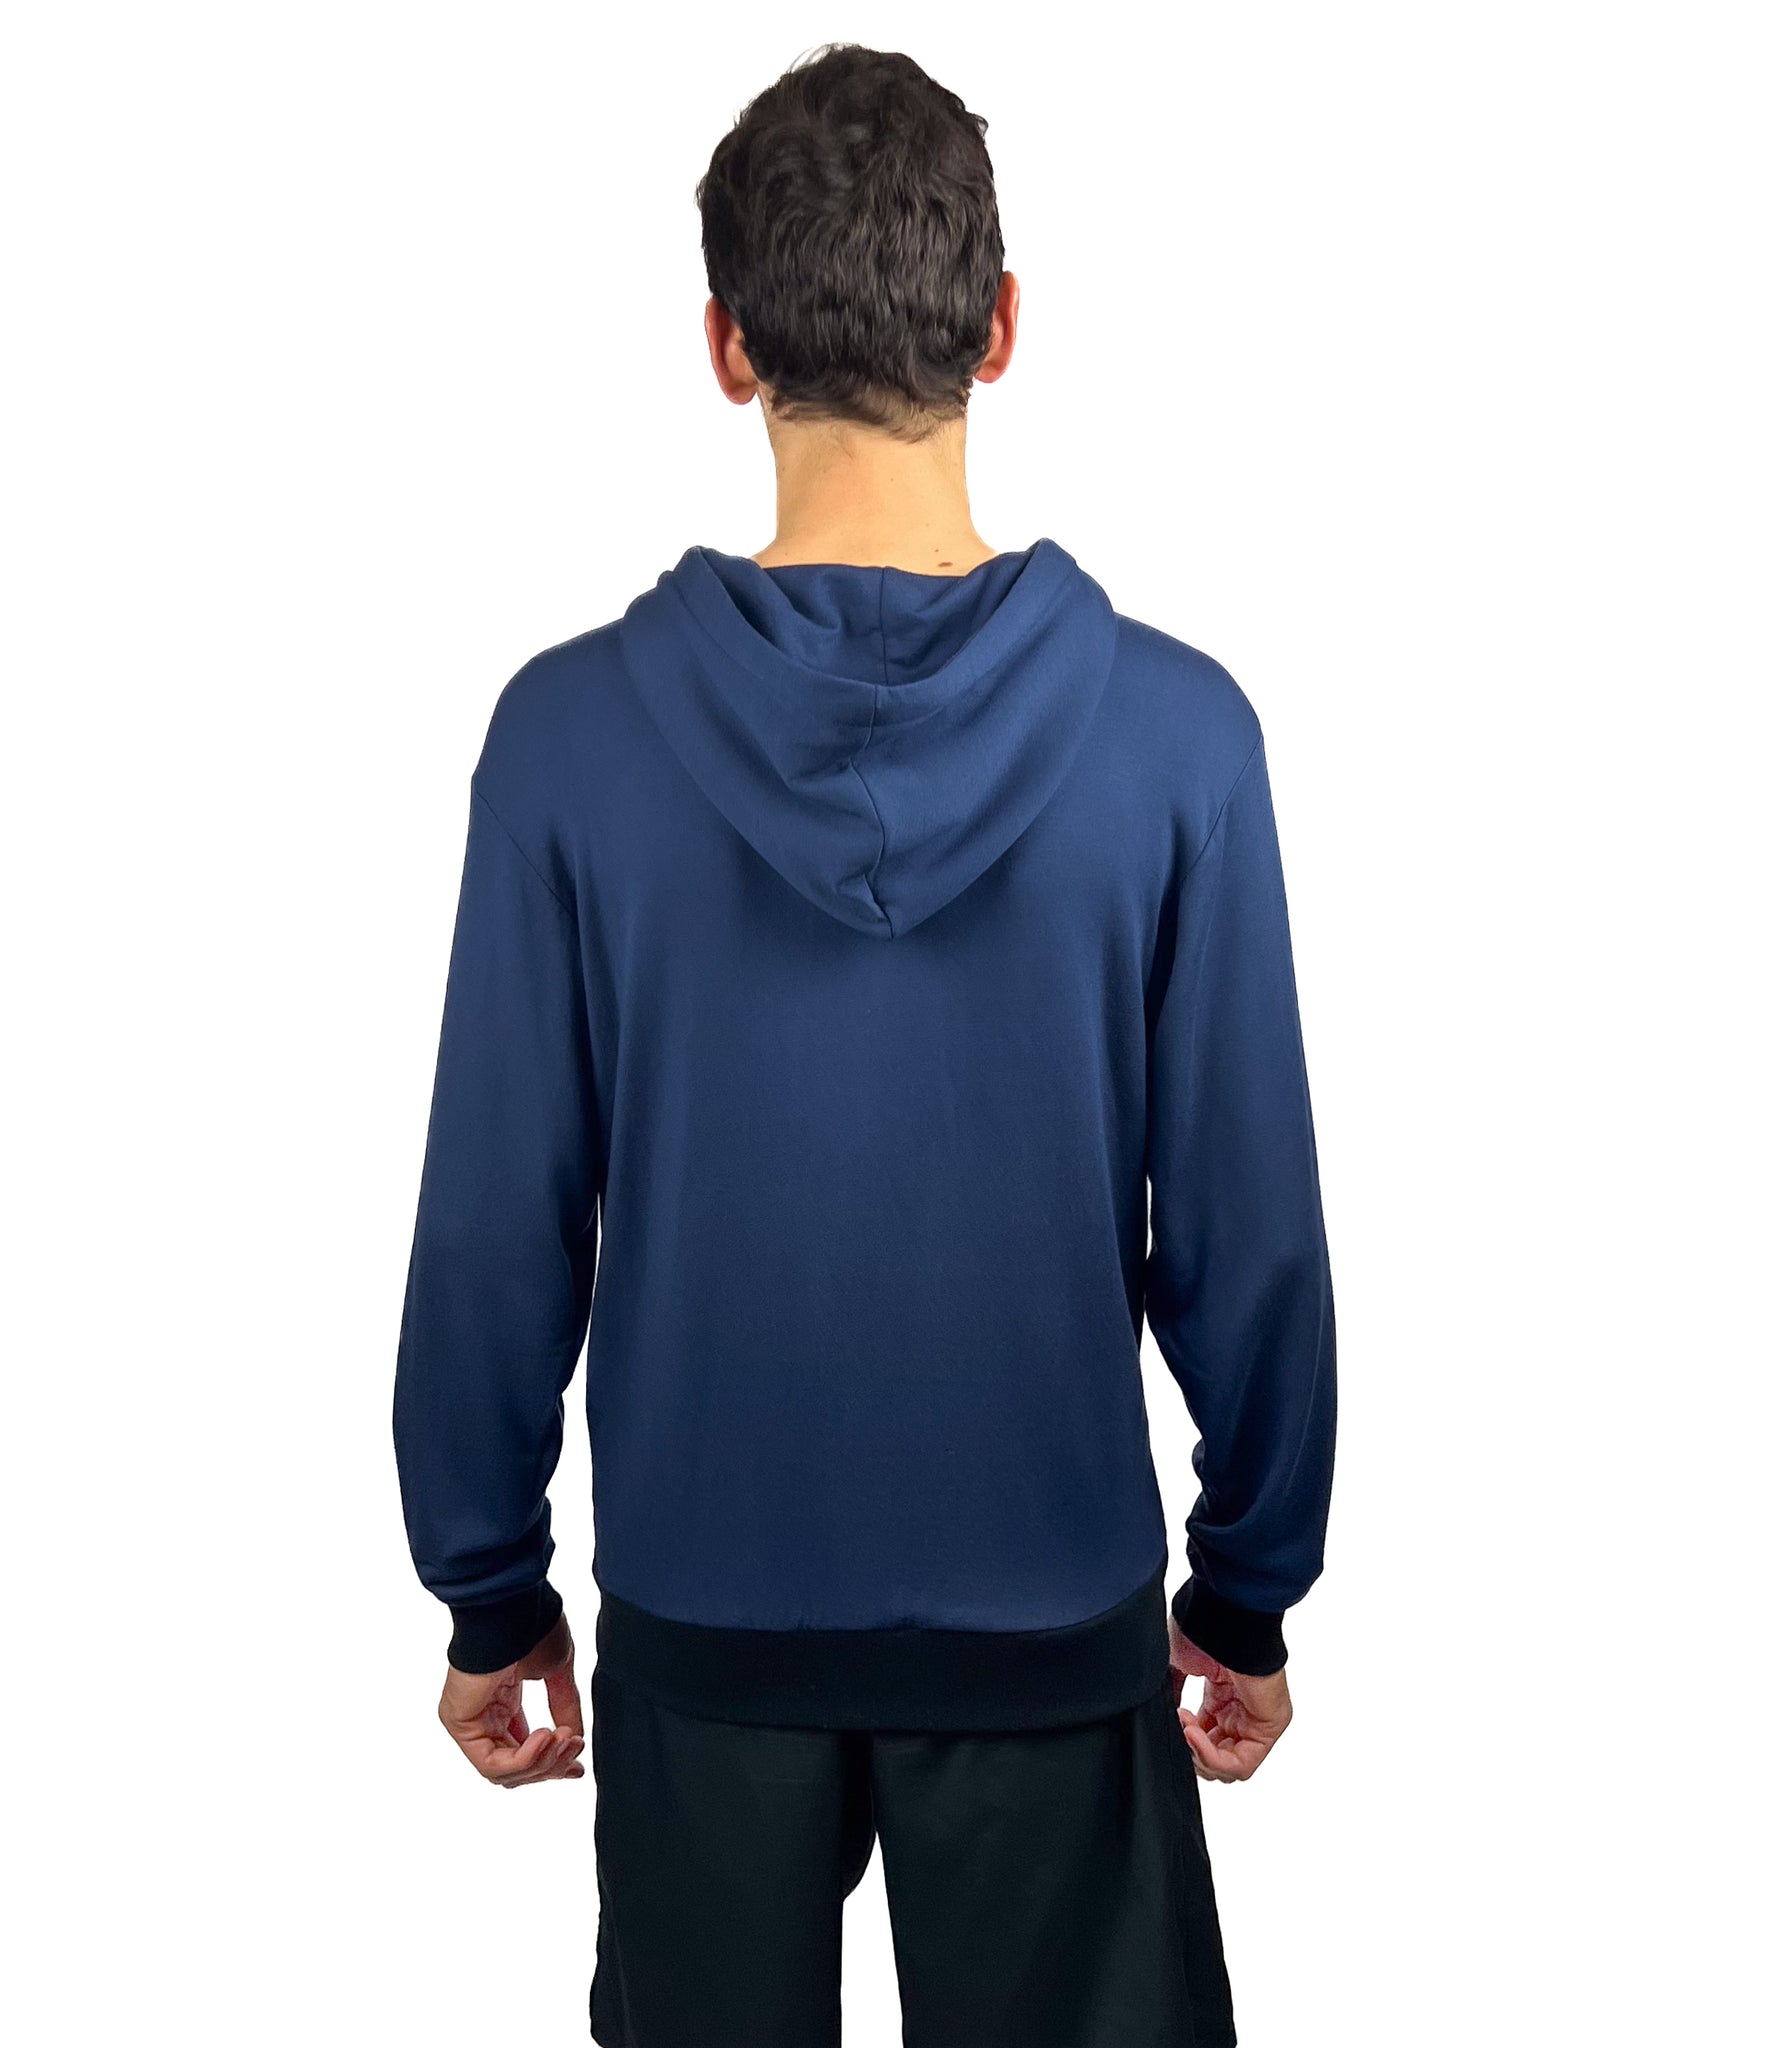 The Insanely Soft Hoodie